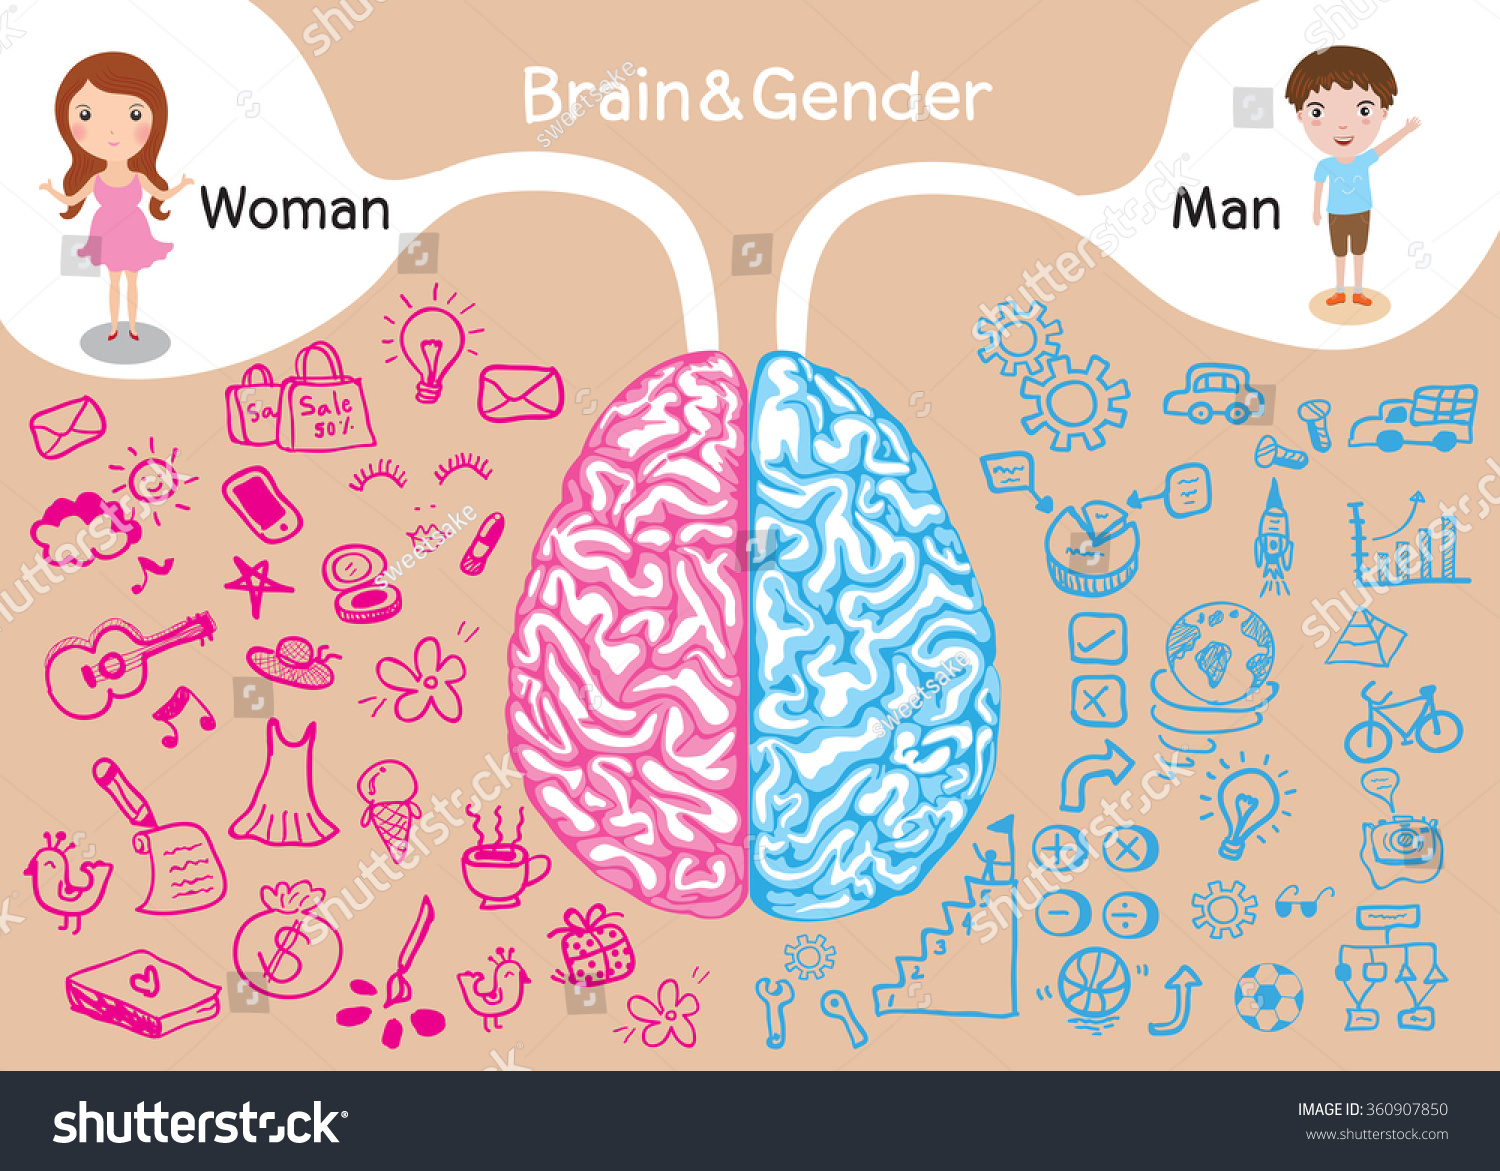 Sexual Differences Between Men And Women 77